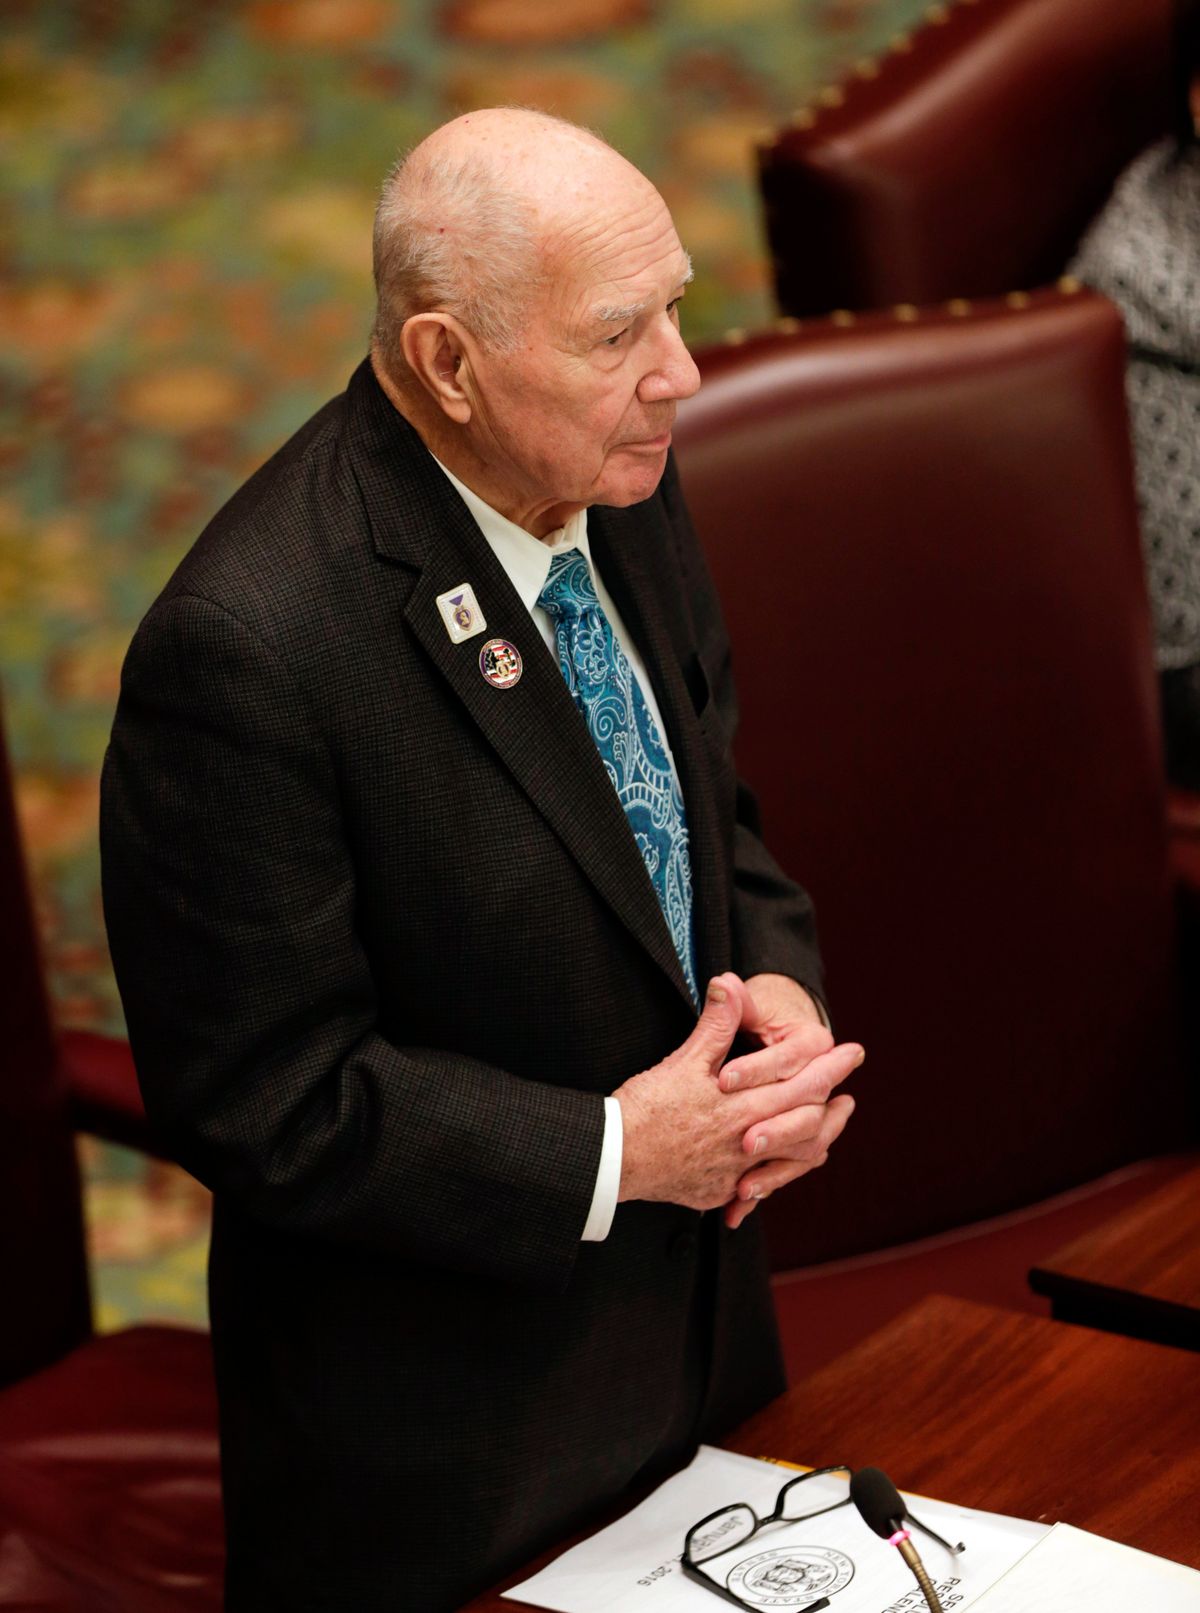 Longtime NY Lawmaker, WWII Veteran Dies at 91